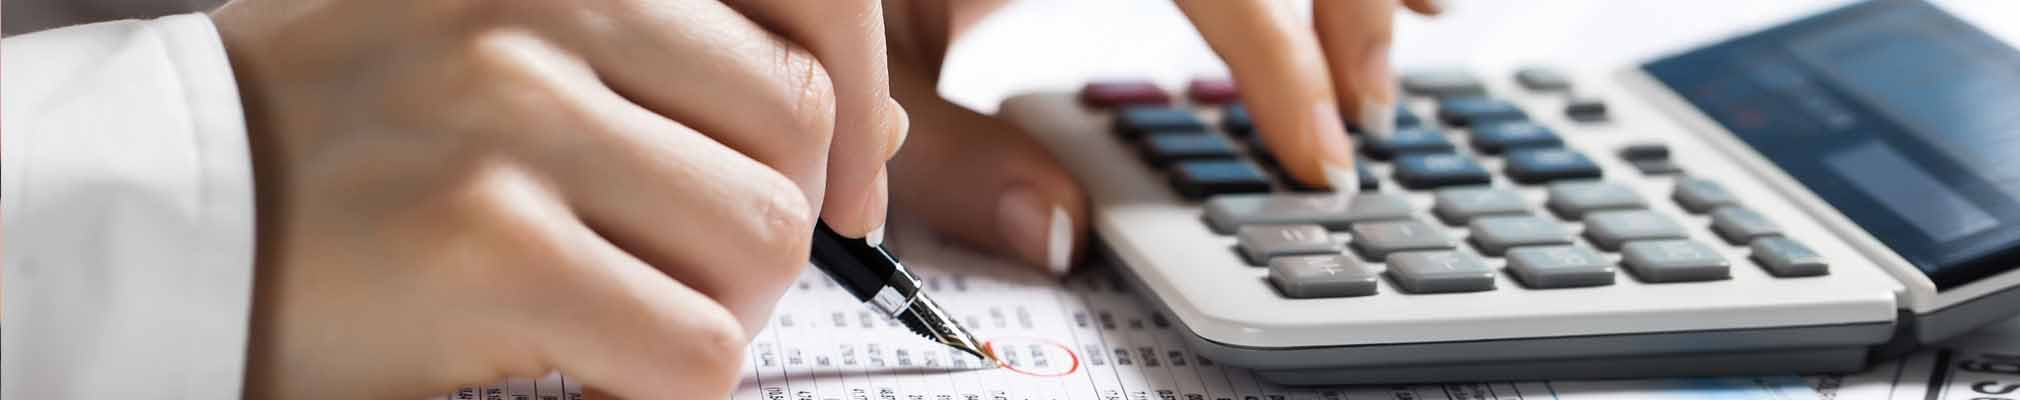 Tax Return Preparation Services in US